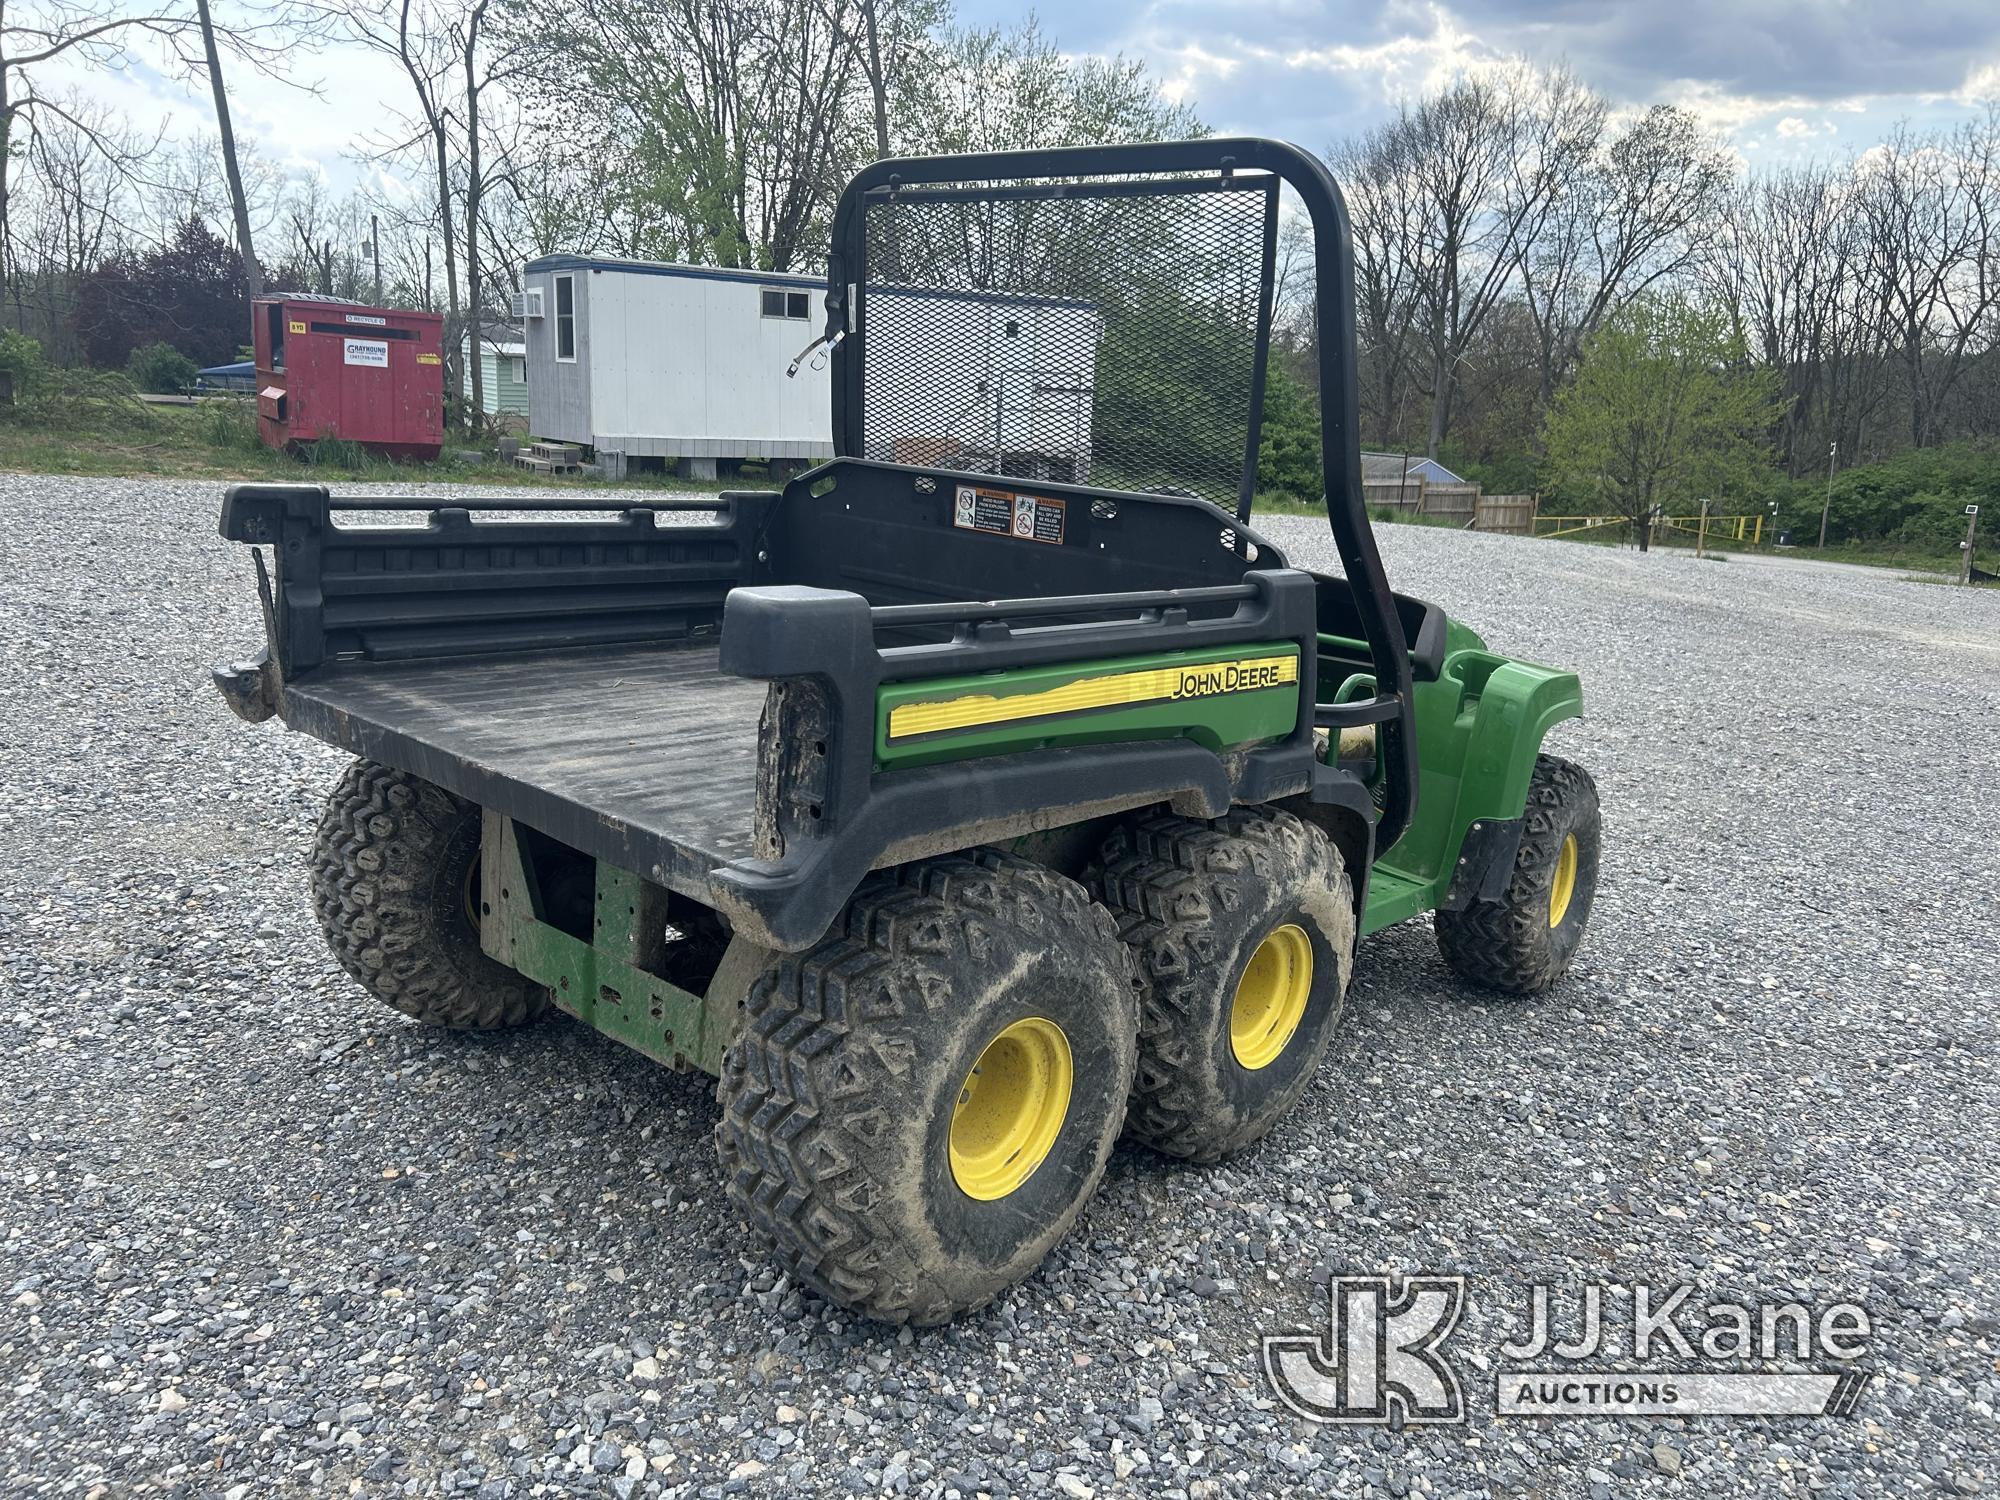 (Hagerstown, MD) 2018 John Deere Gator All-Terrain Vehicle Runs & Moves, Missing Parts & Pieces, Rus